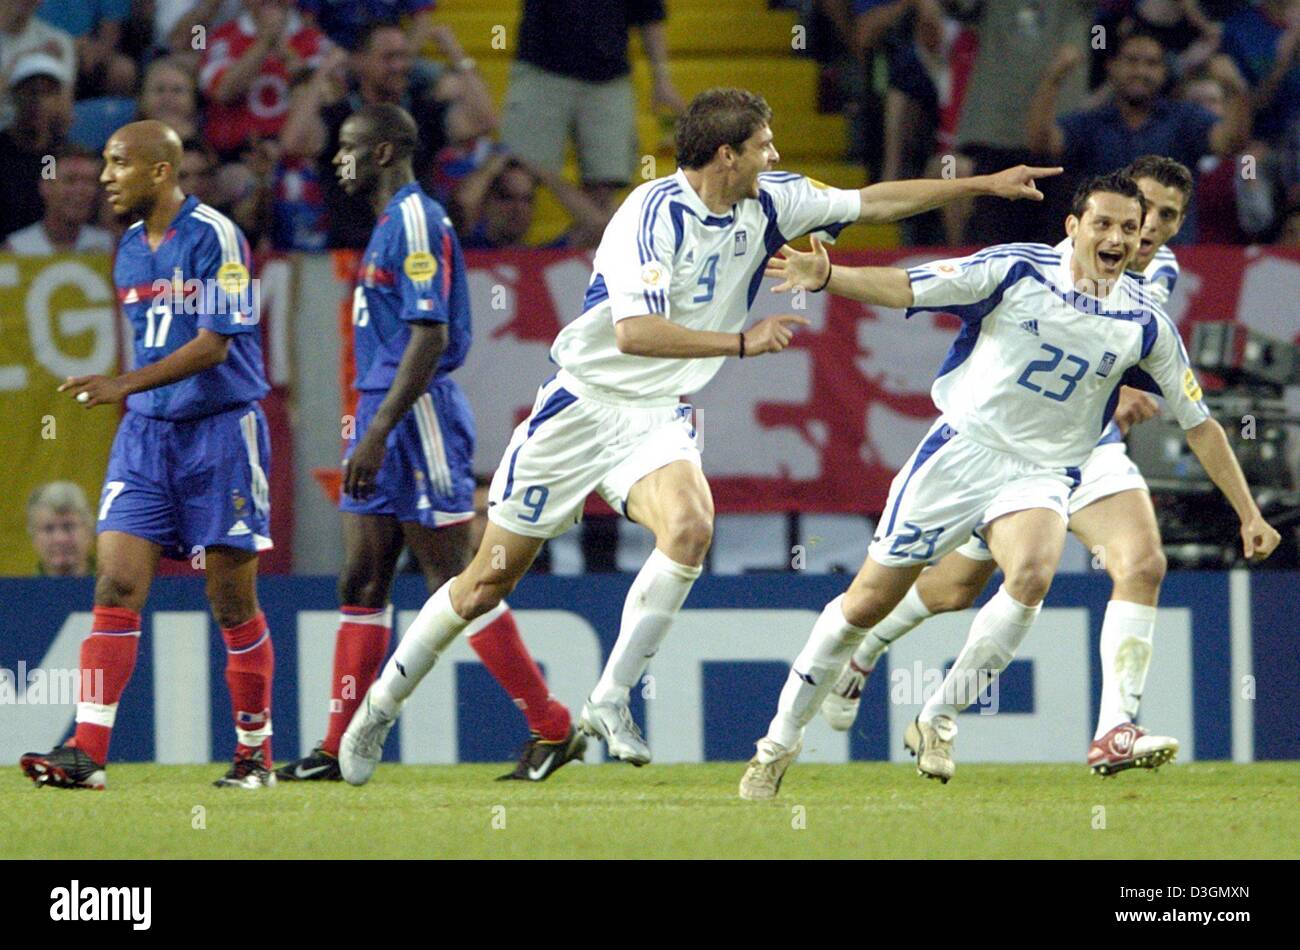 (dpa) - Greek forward Angelos Charisteas (C) cheers with his teammates Vassilos Lakis (2nd from L) and Konstantinos Katsouranis (R) after scoring during the Soccer Euro 2004 quarter final opposing France and Greece in Lisbon, Portugal, 25 June 2004. French players Liliam Thuram (2nd from R) and Olivier Dacourt look defeated. With a sensational 1-0 victory Greece eliminates title de Stock Photo